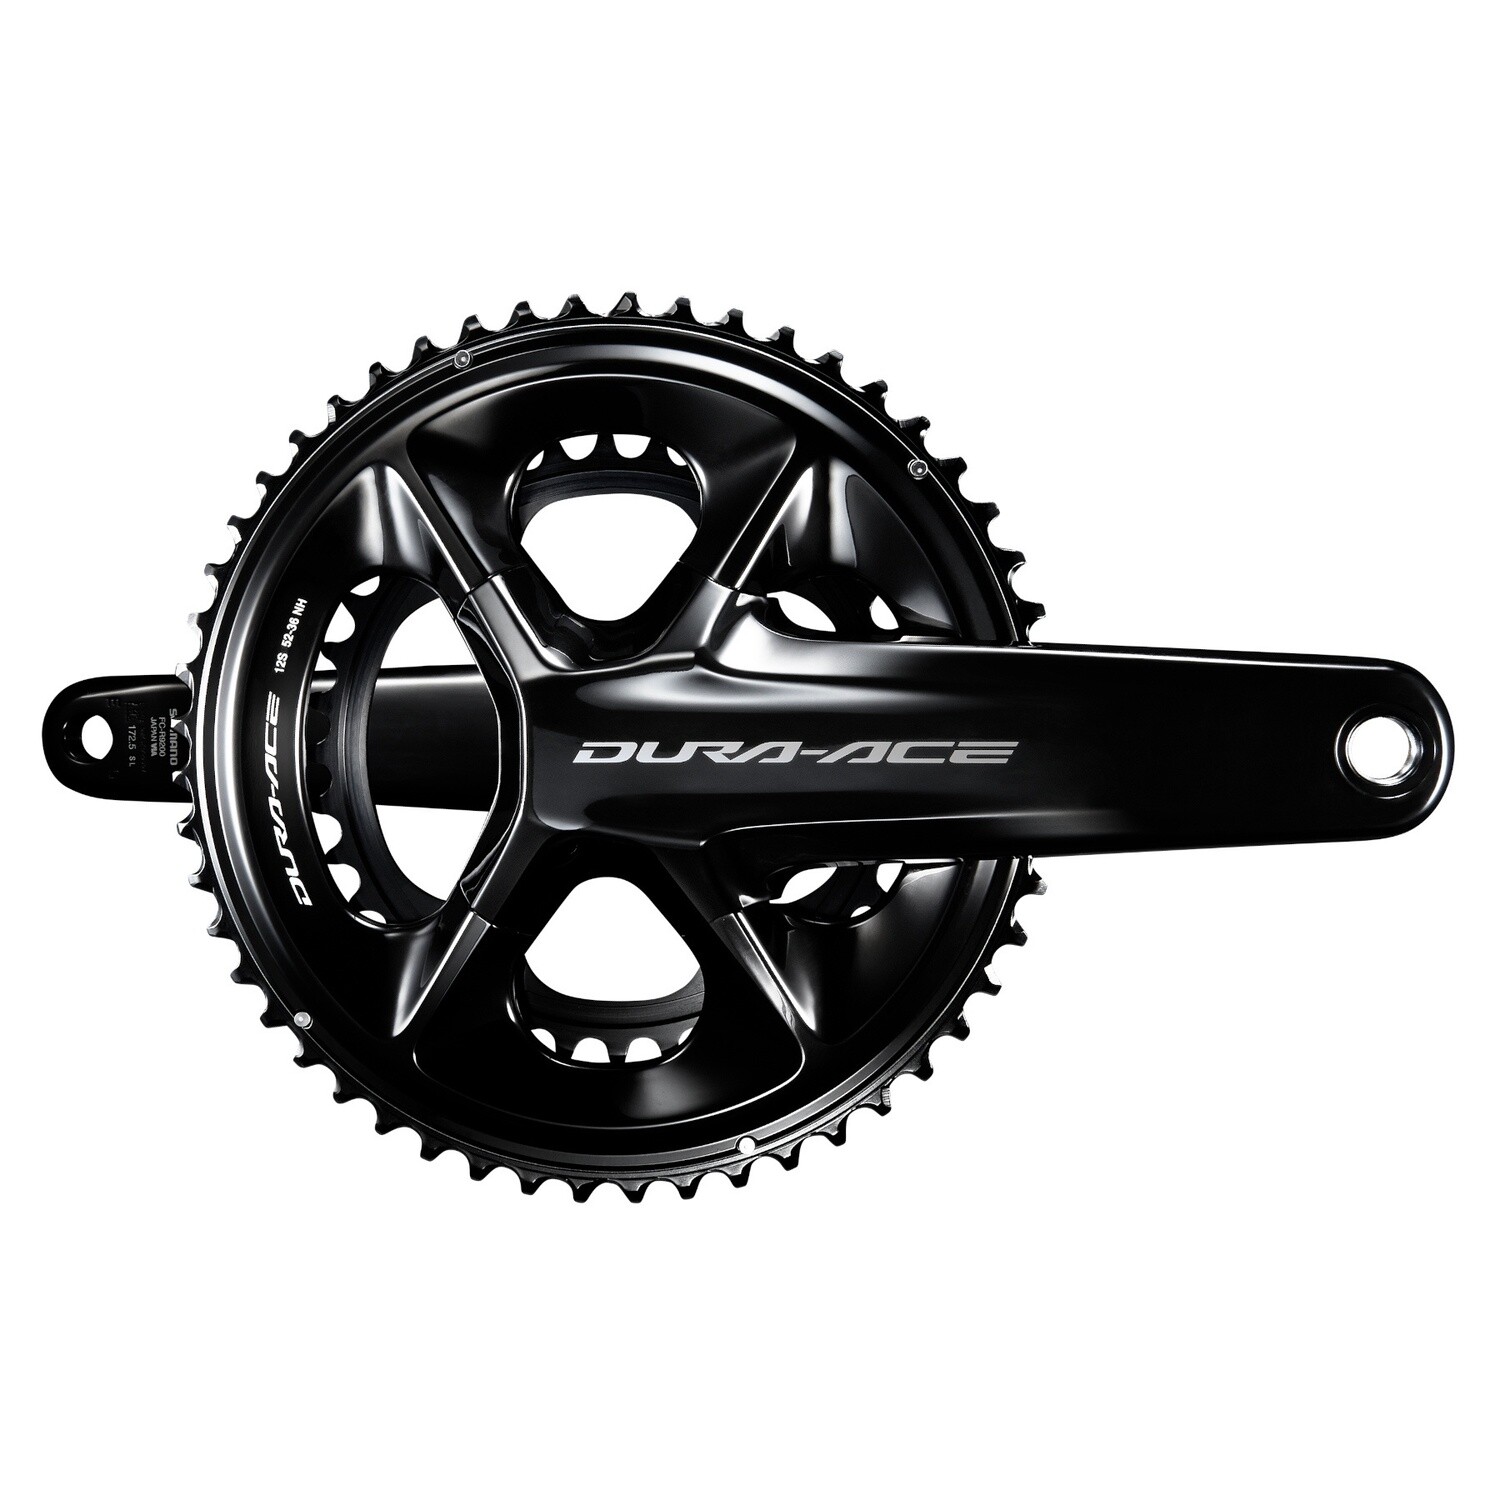 Shimano Dura Ace front chainwheel FC-R9200 for 12spd, Crank Length: 165mm, Chainrings: 50-34t